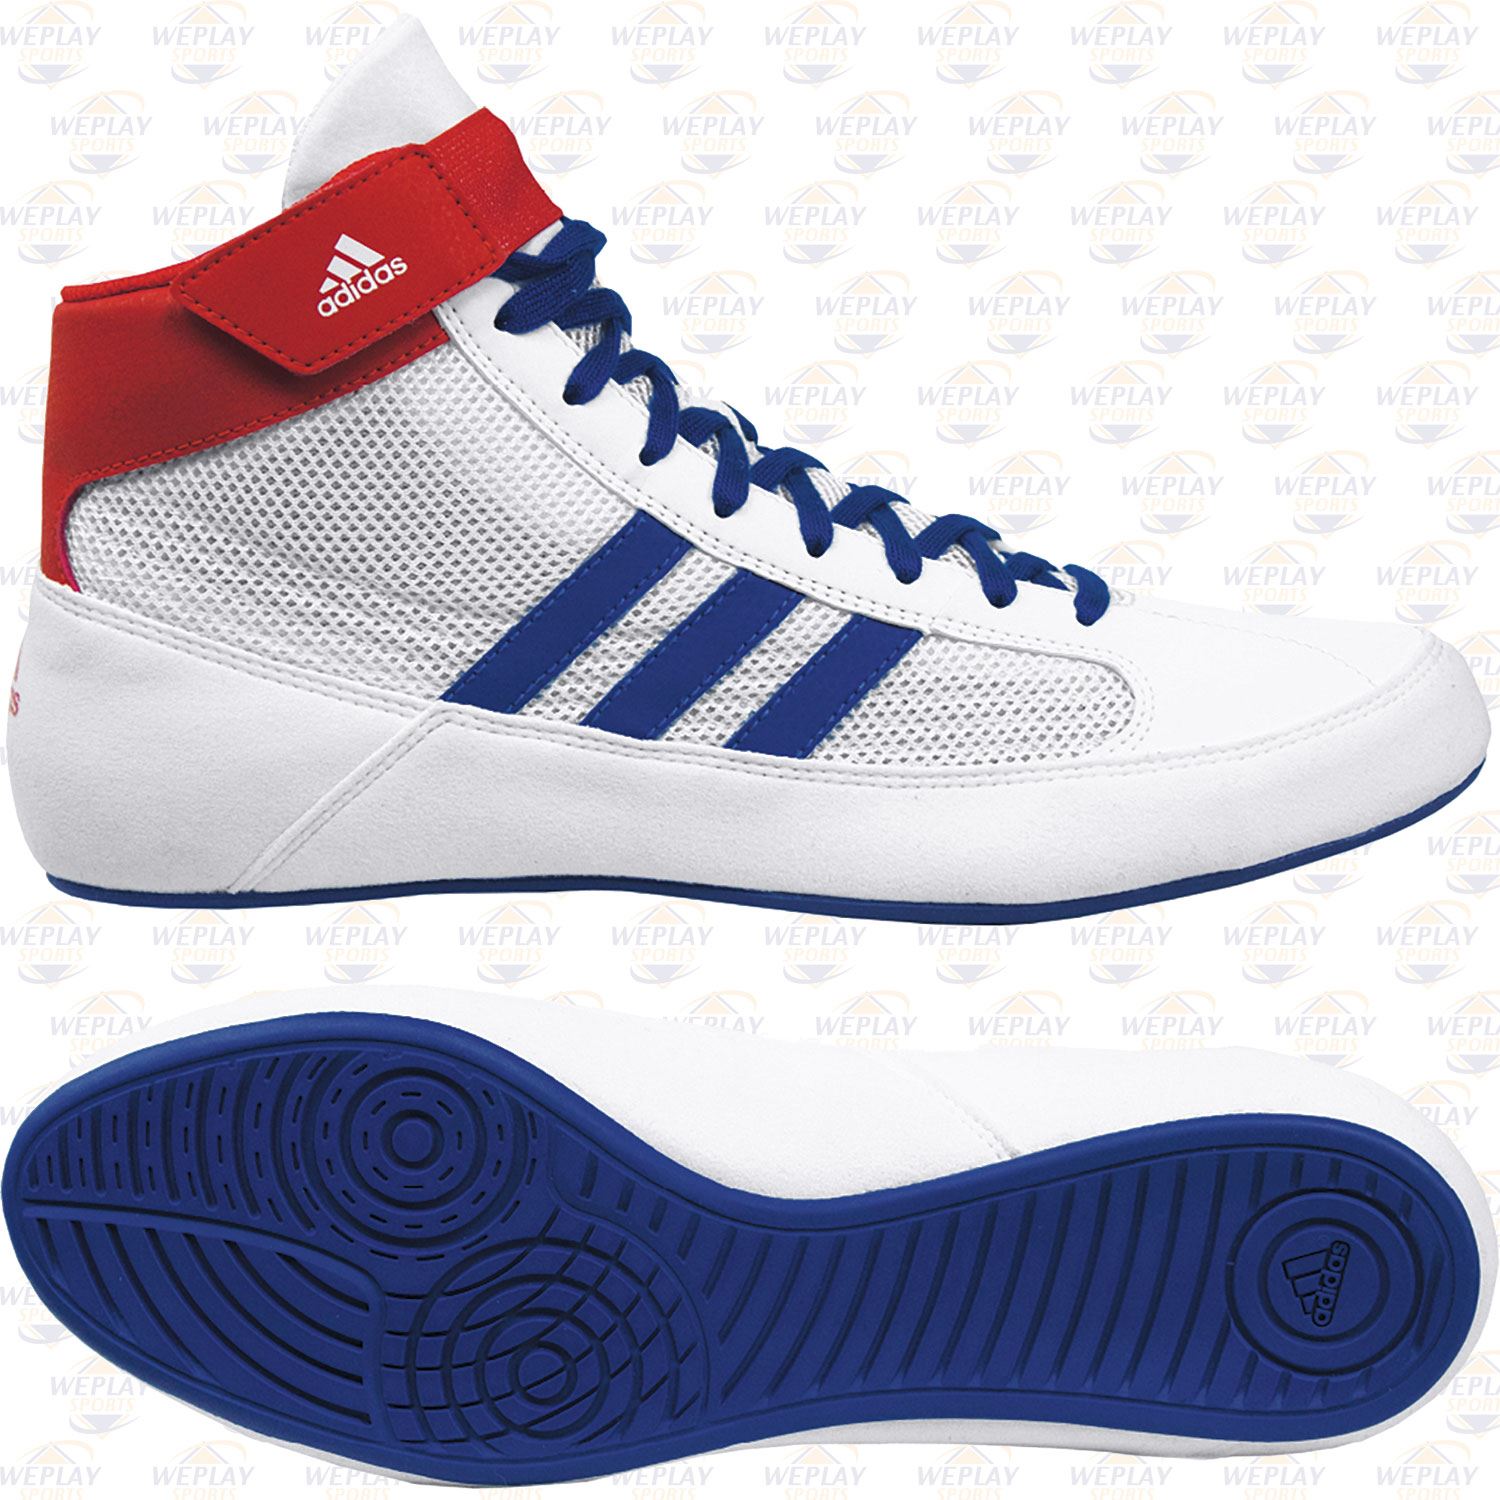 adidas hvc youth wrestling shoes